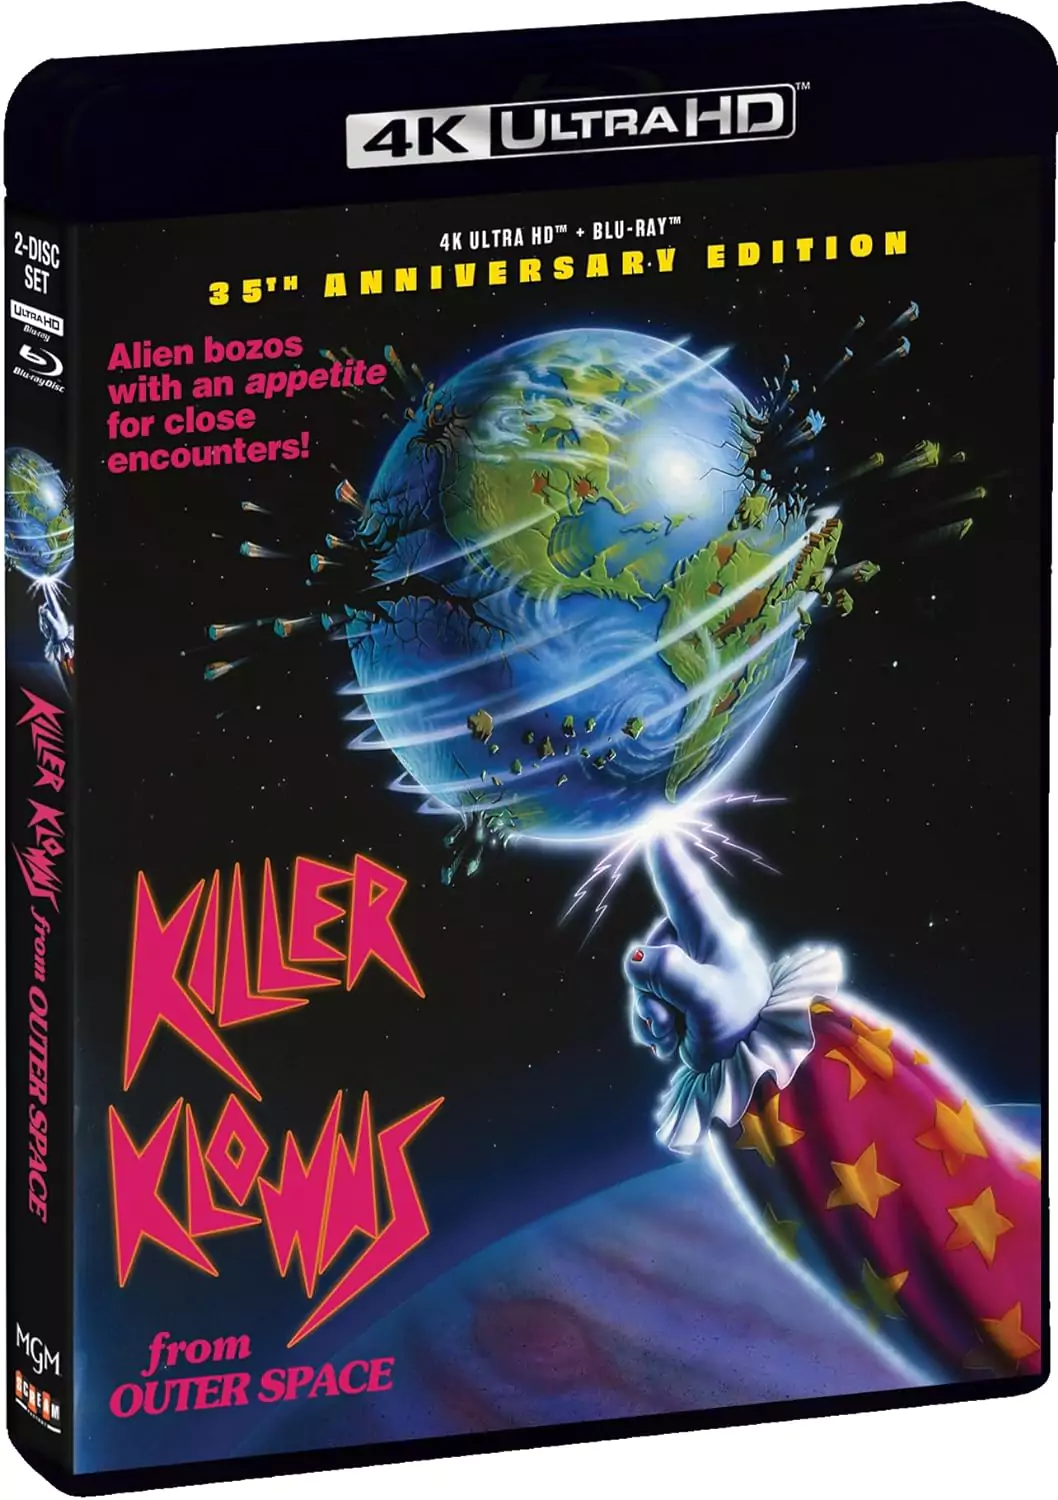 Killer Klowns From Outer Space 4K Scream Factory